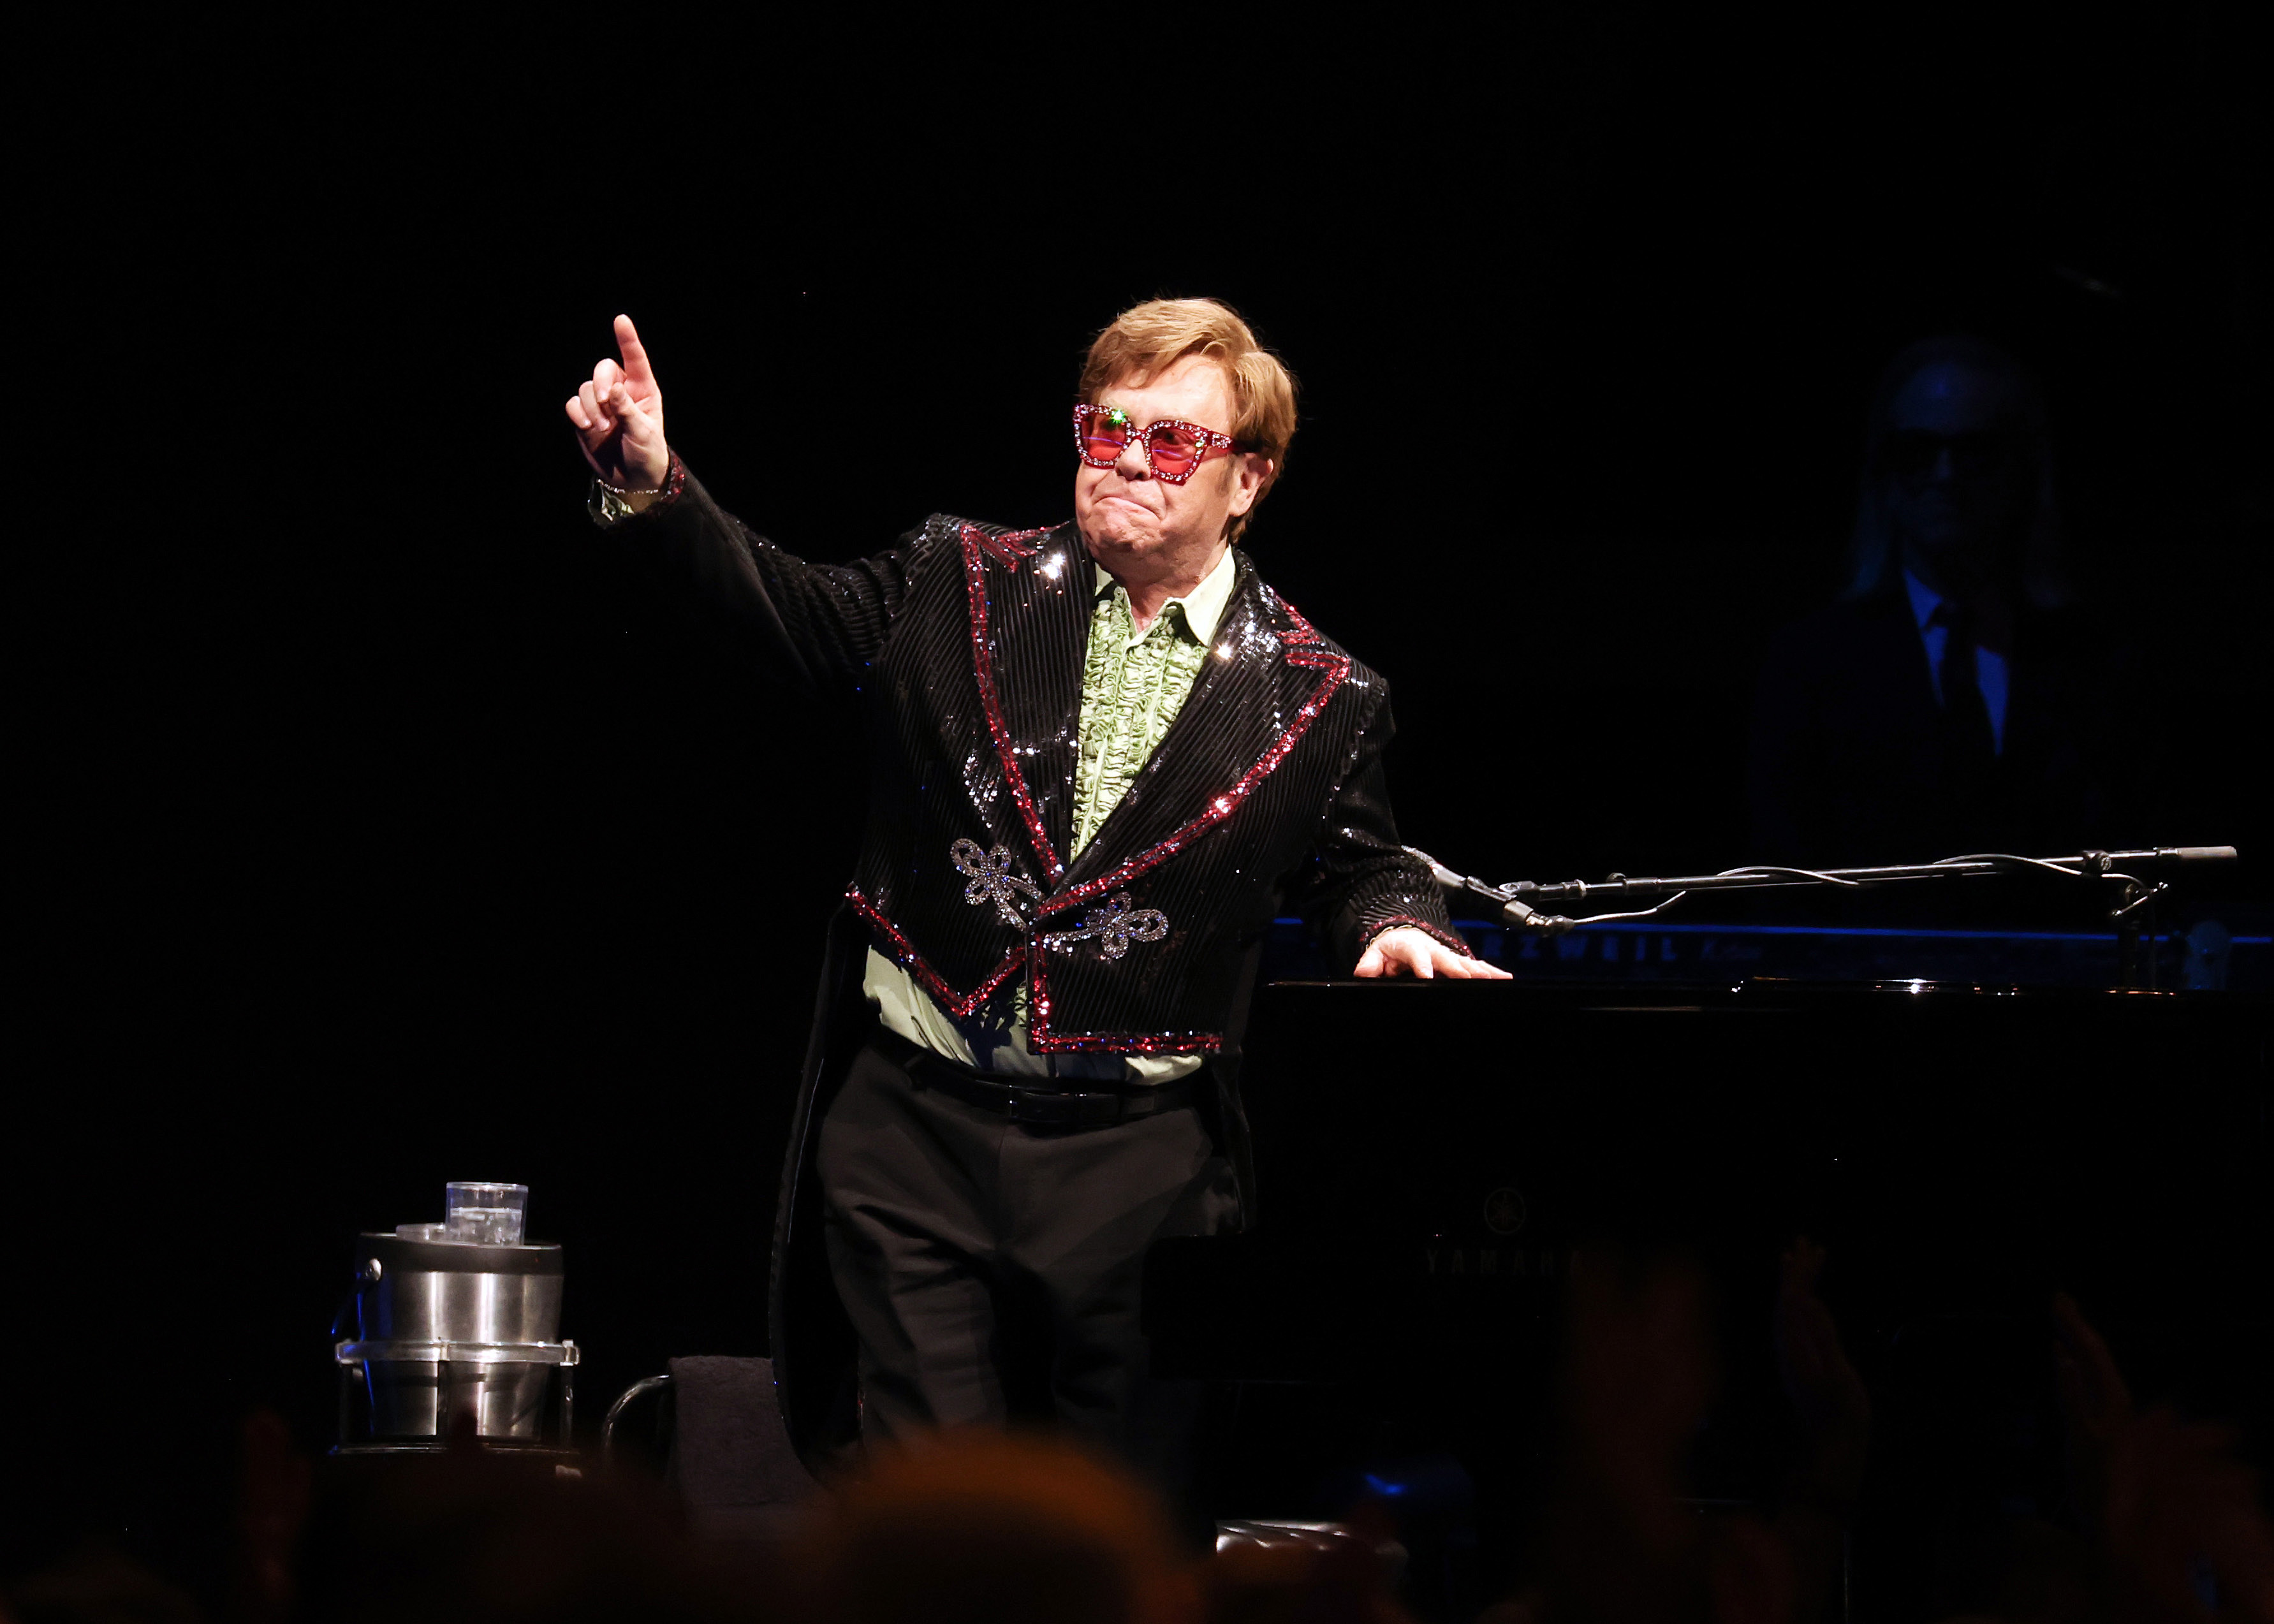 Elton John Performs live on stage during his "Farewell Yellow Brick Road" Tour at The O2 Arena on April 2, 2023, in London, England. | Source: Getty Images